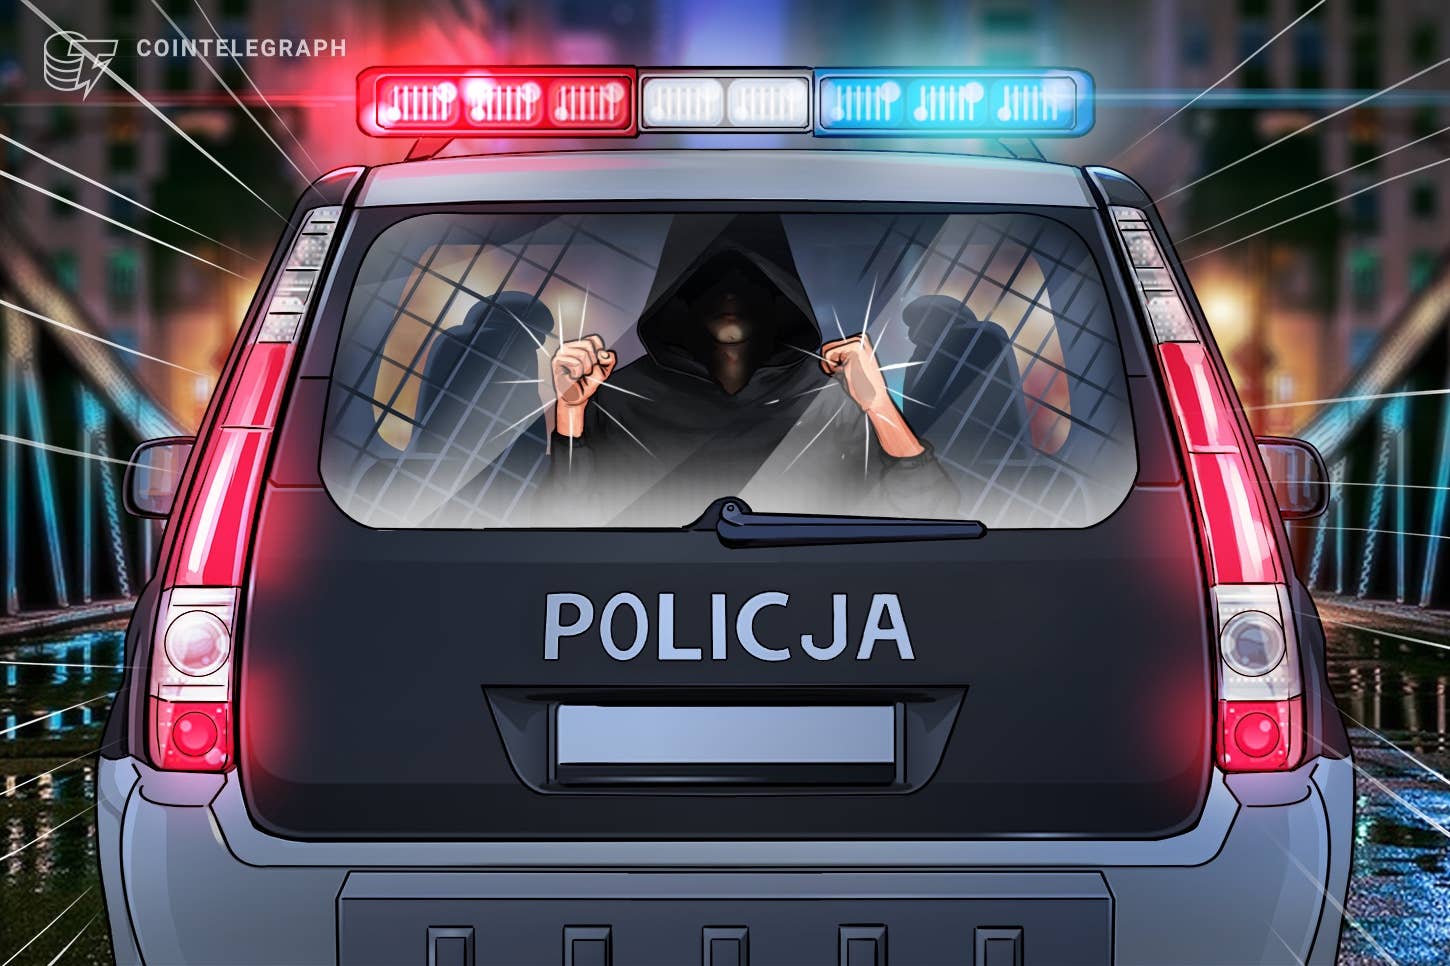 Former chief of Russia’s Wex crypto exchange arrested in Poland